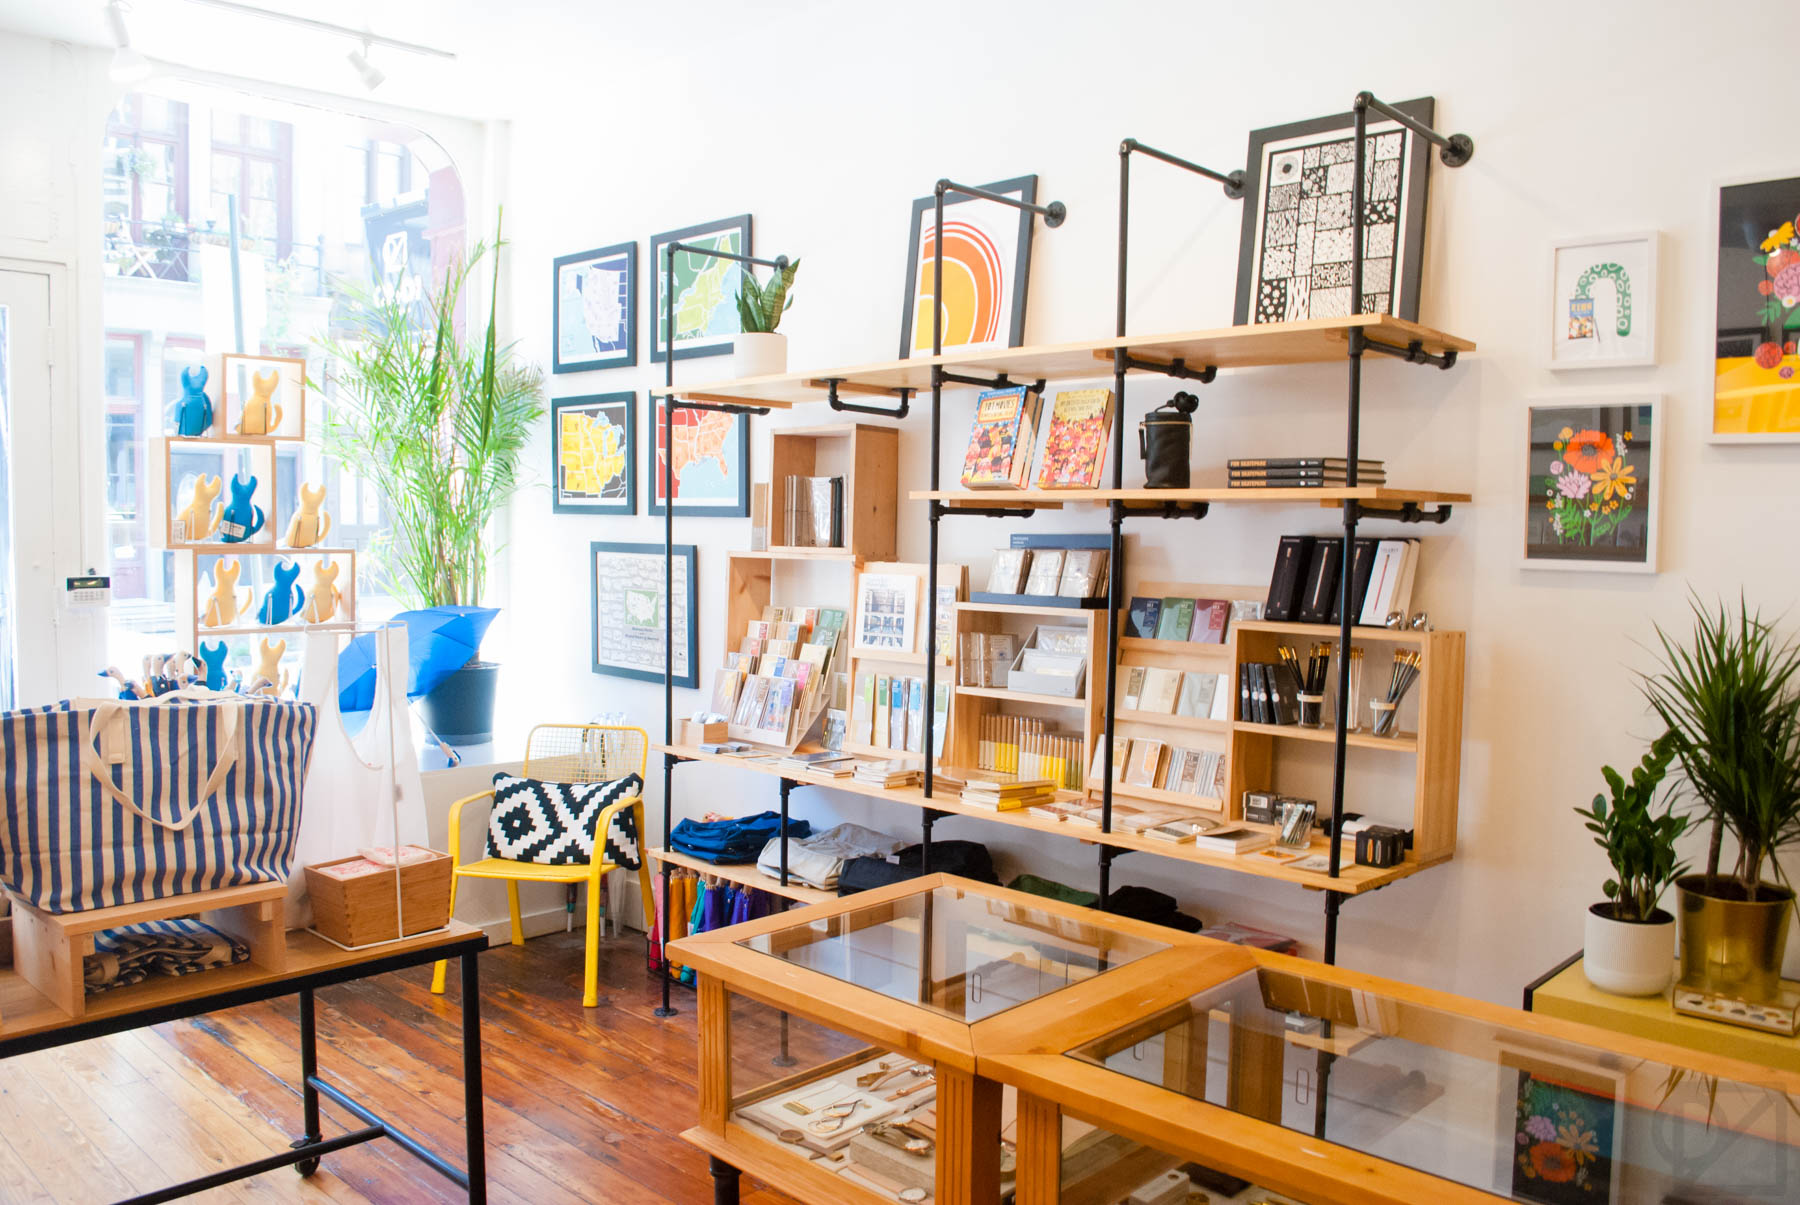 Our Brainstorm Prints and TRAVELER'S Company goods on prominent display right when you walk in.